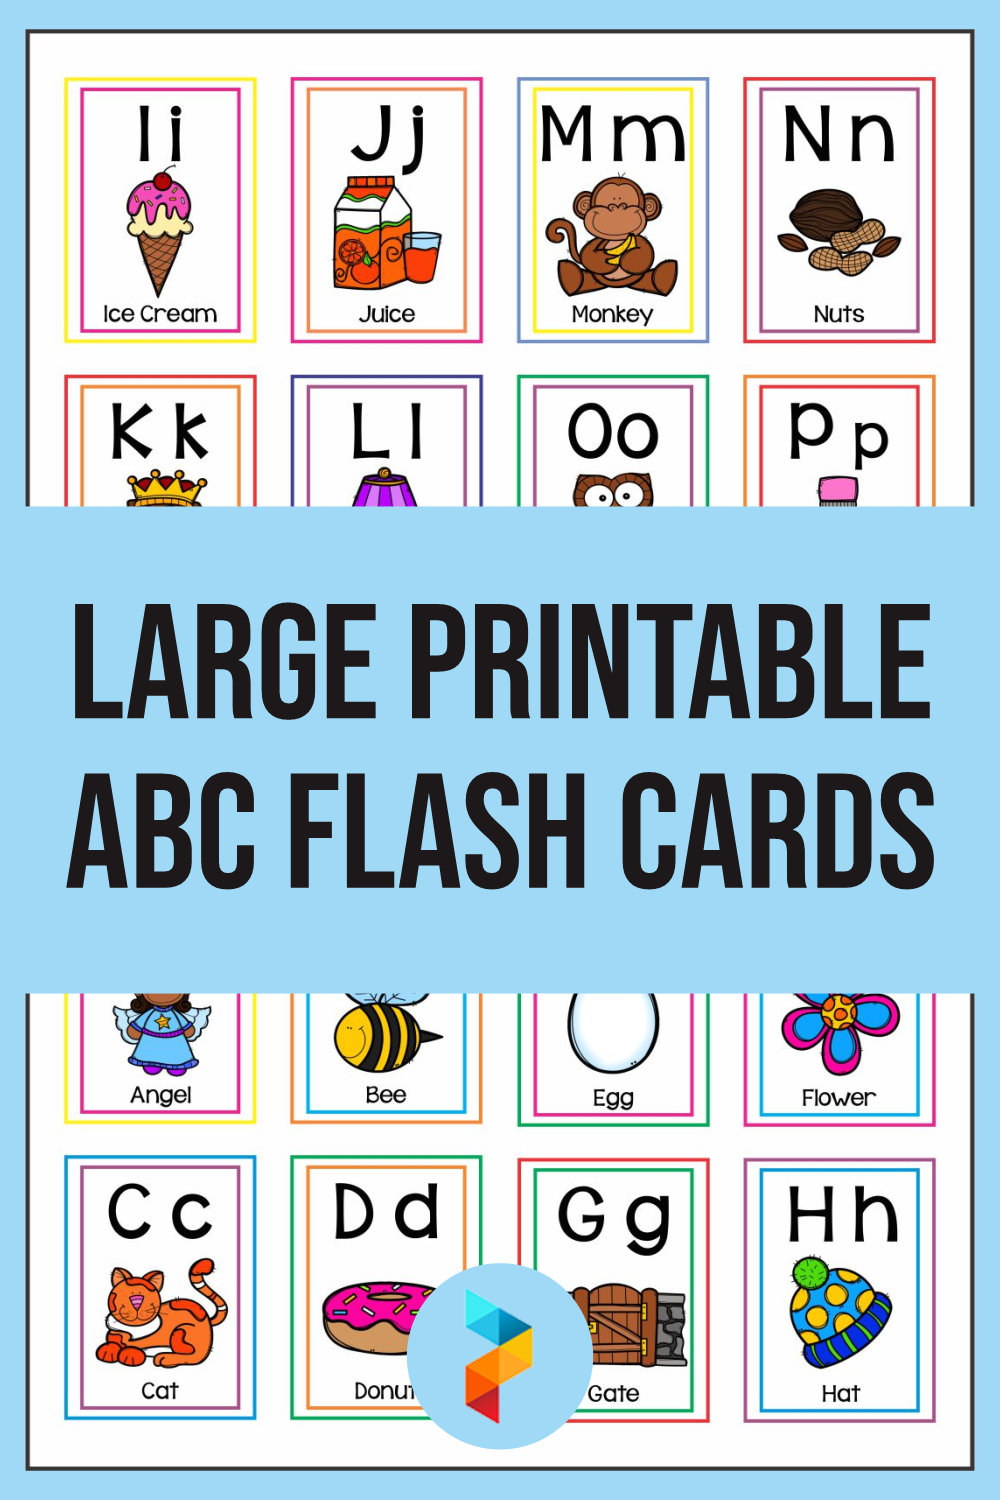 6-best-images-of-abc-cards-printable-for-preschool-printable-alphabet